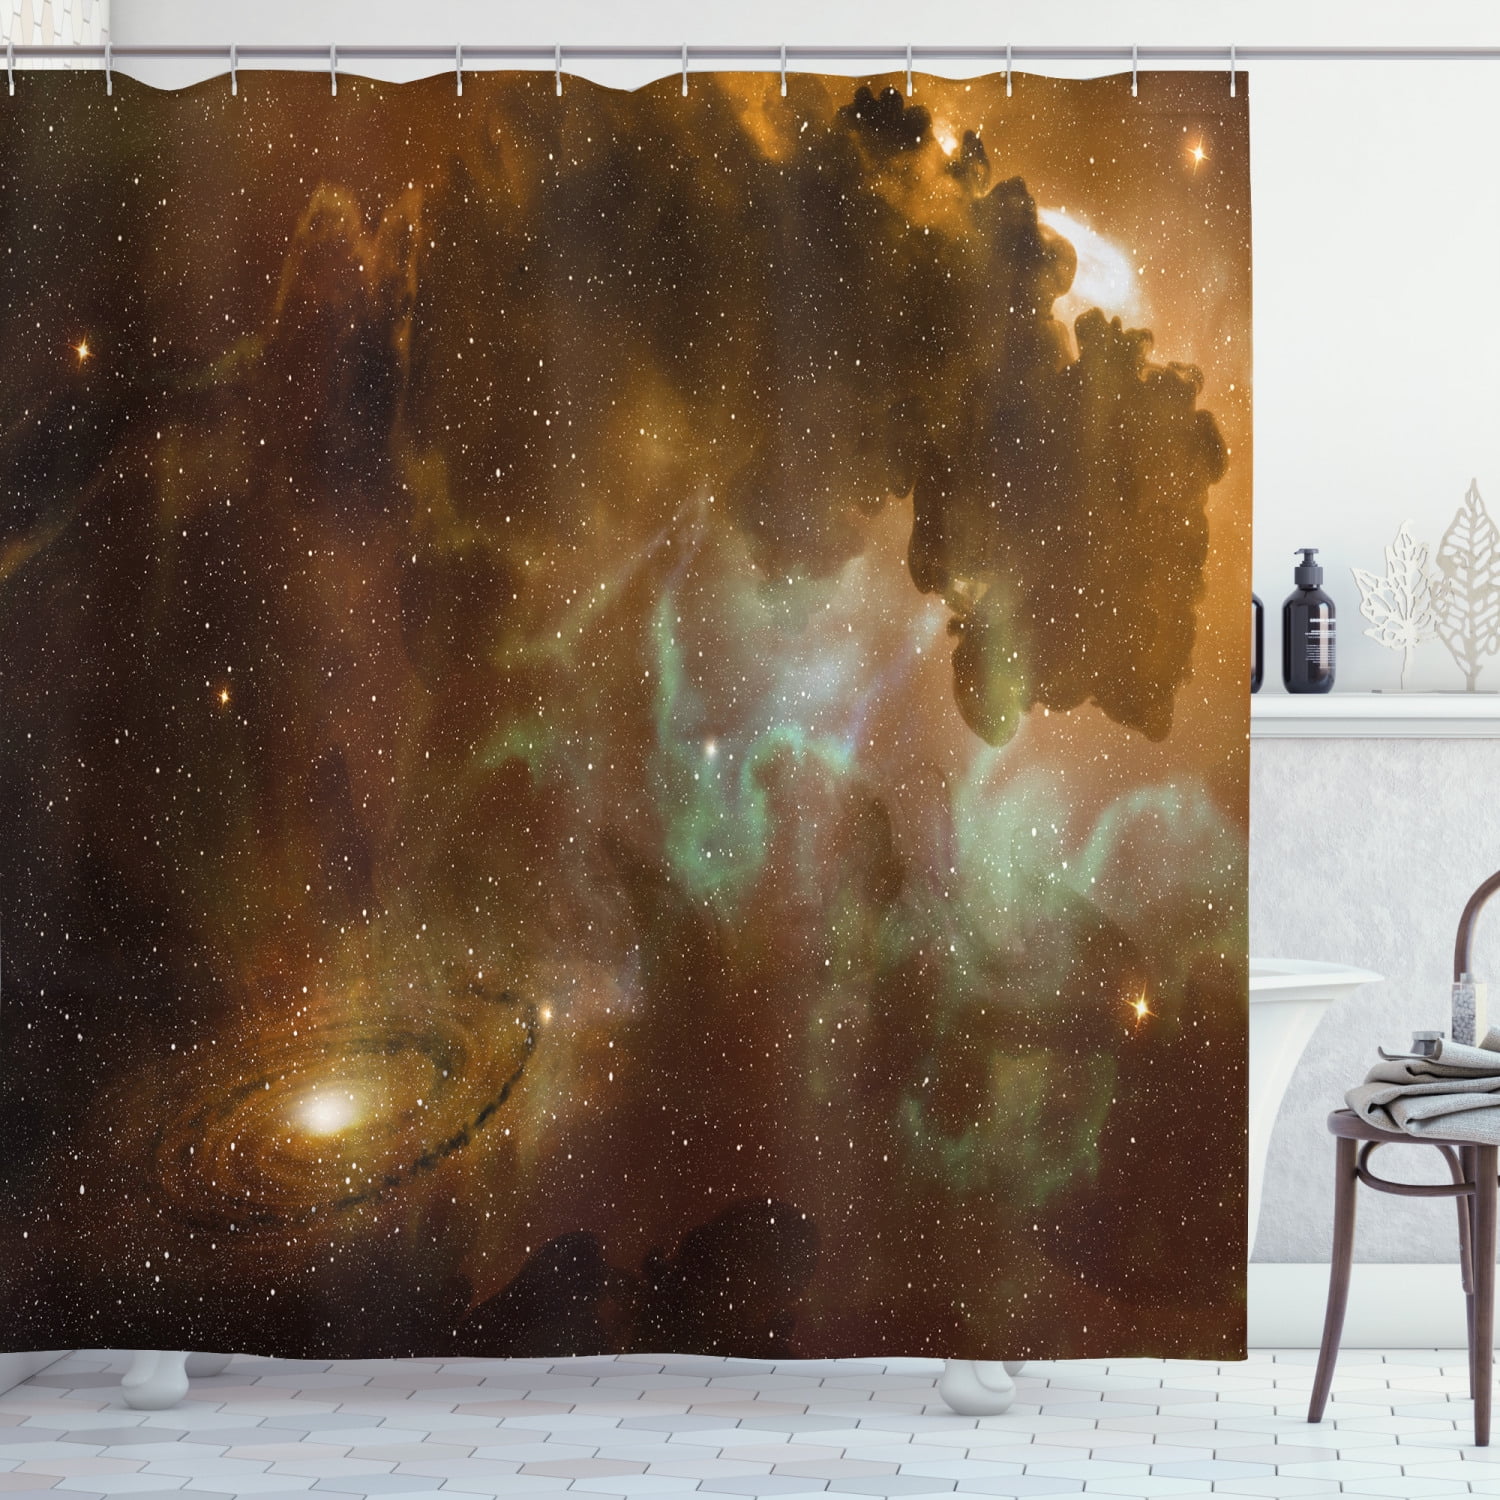 Planets Over Nebula Gas Cloud in Space Galaxy Stars Print Shower Curtain Set 